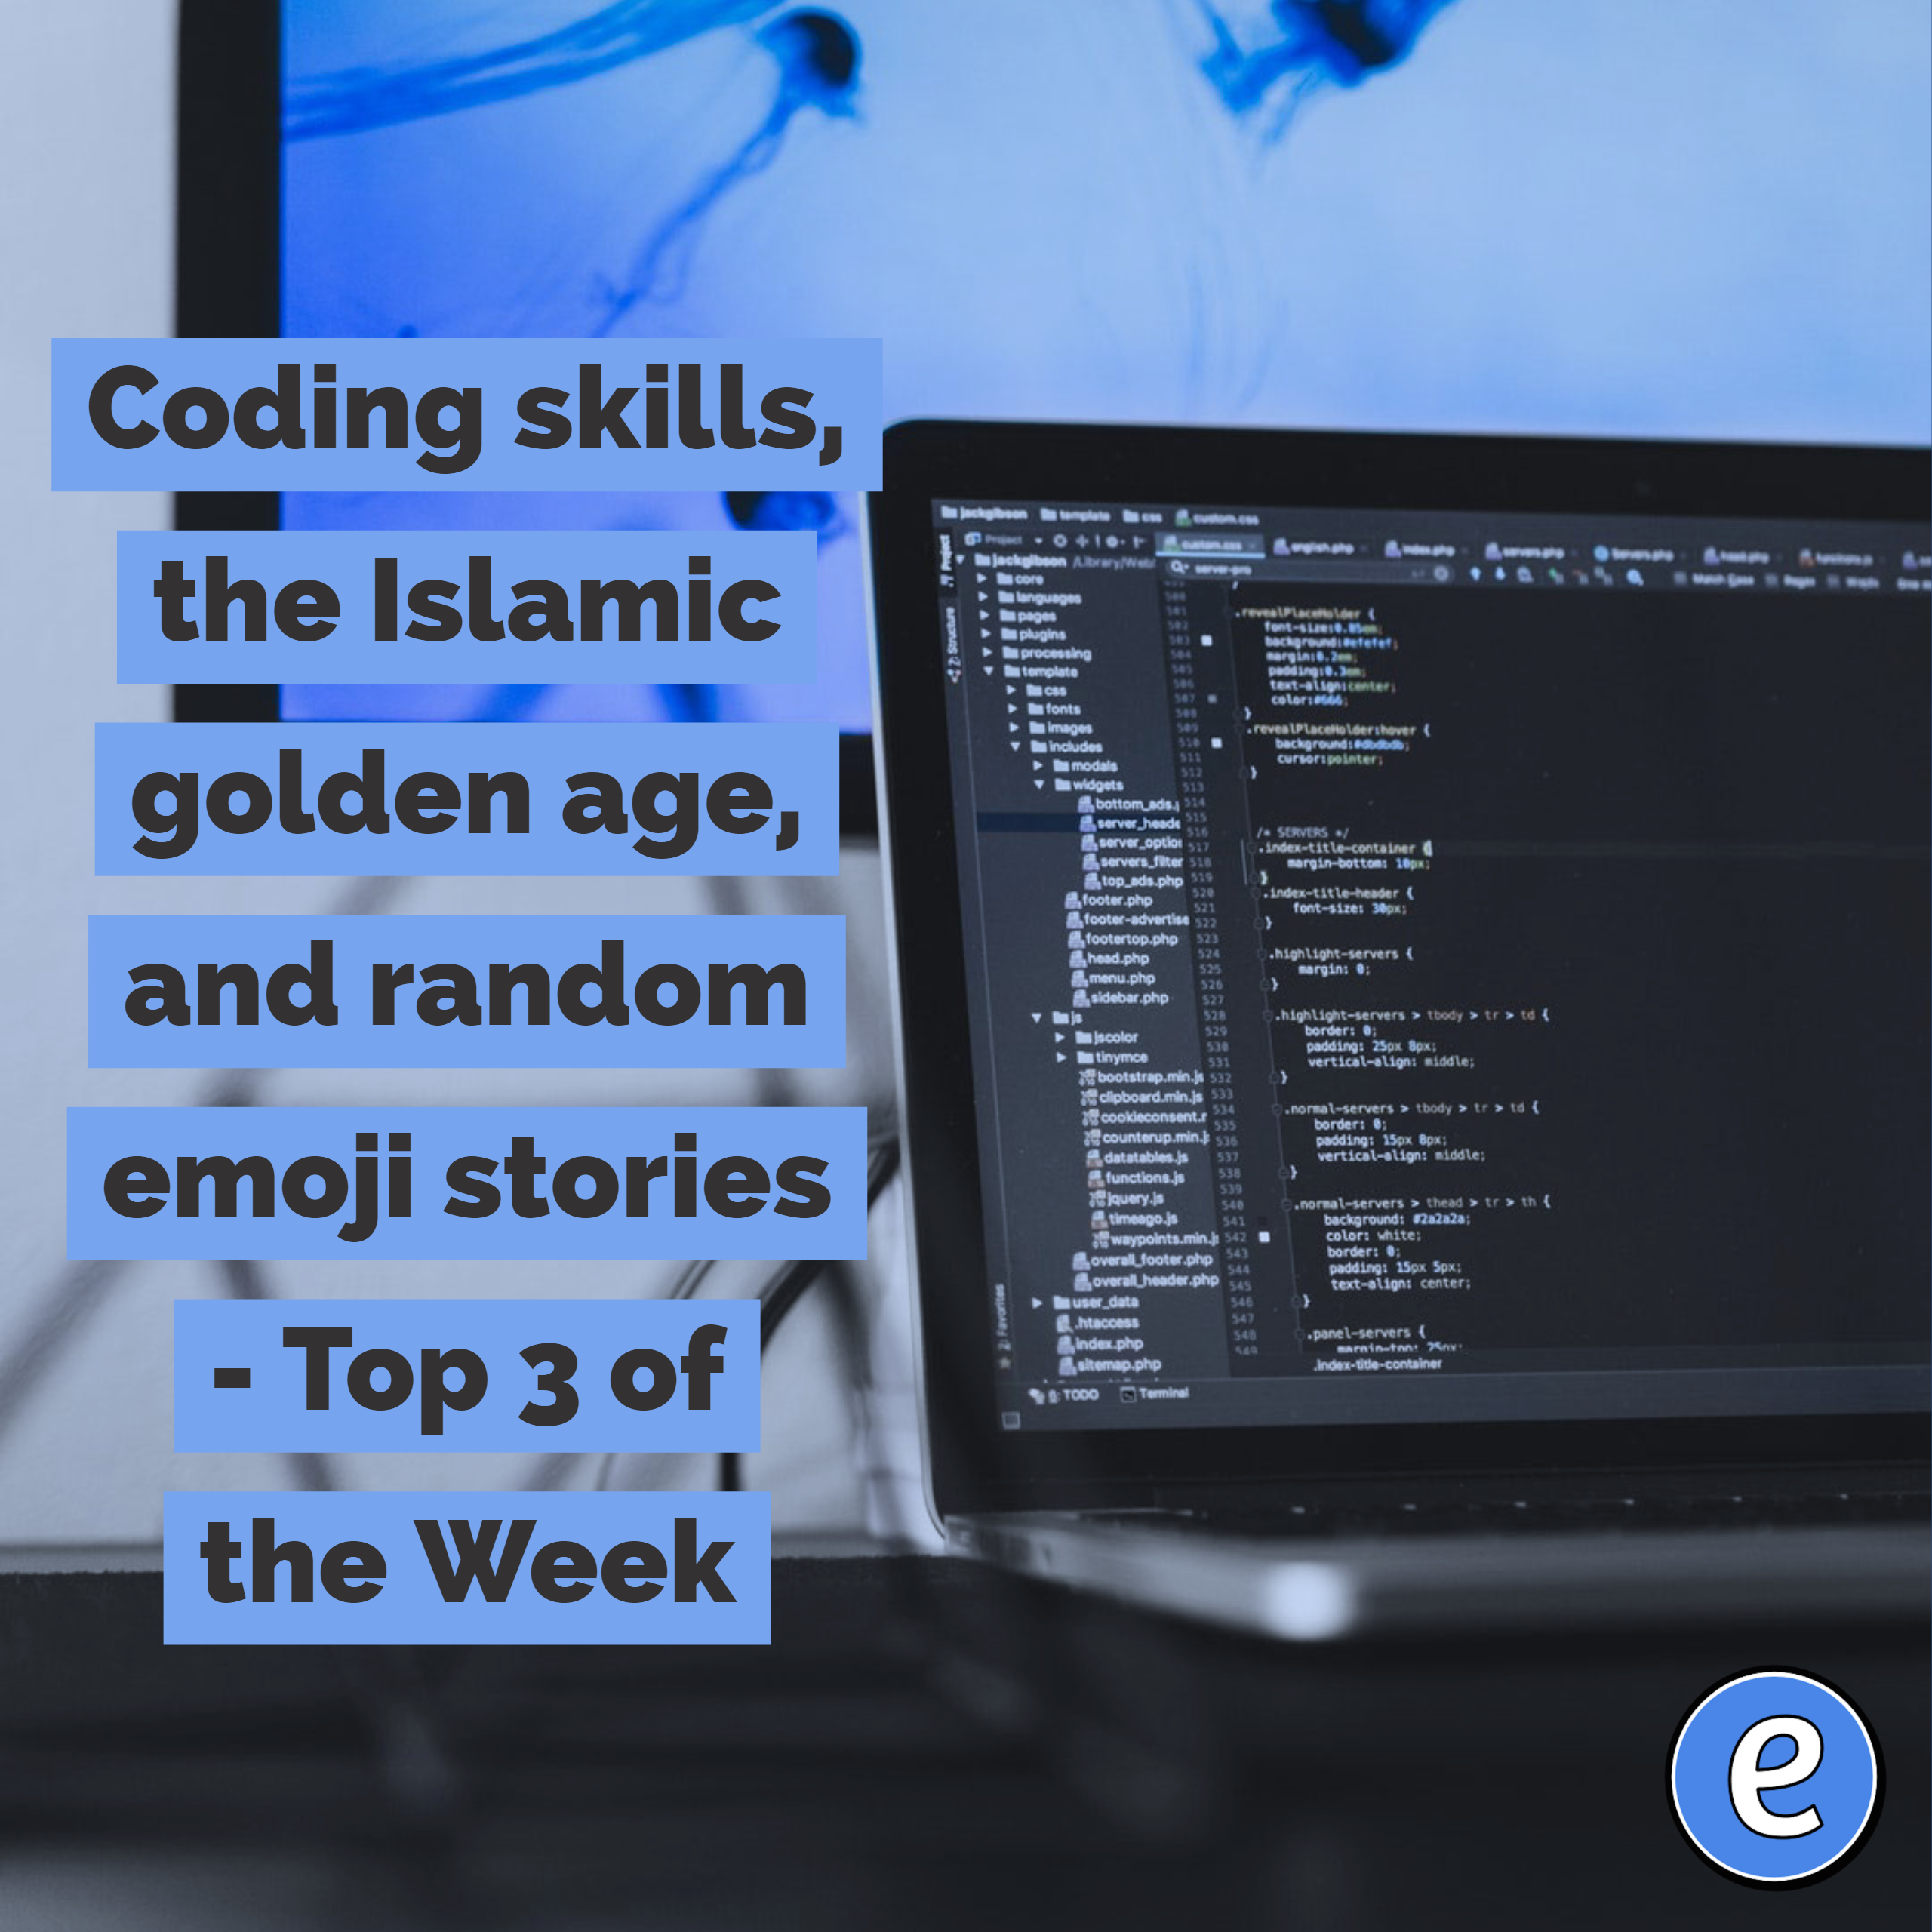 Coding skills, the Islamic golden age, and random emoji stories – Top 3 of the Week